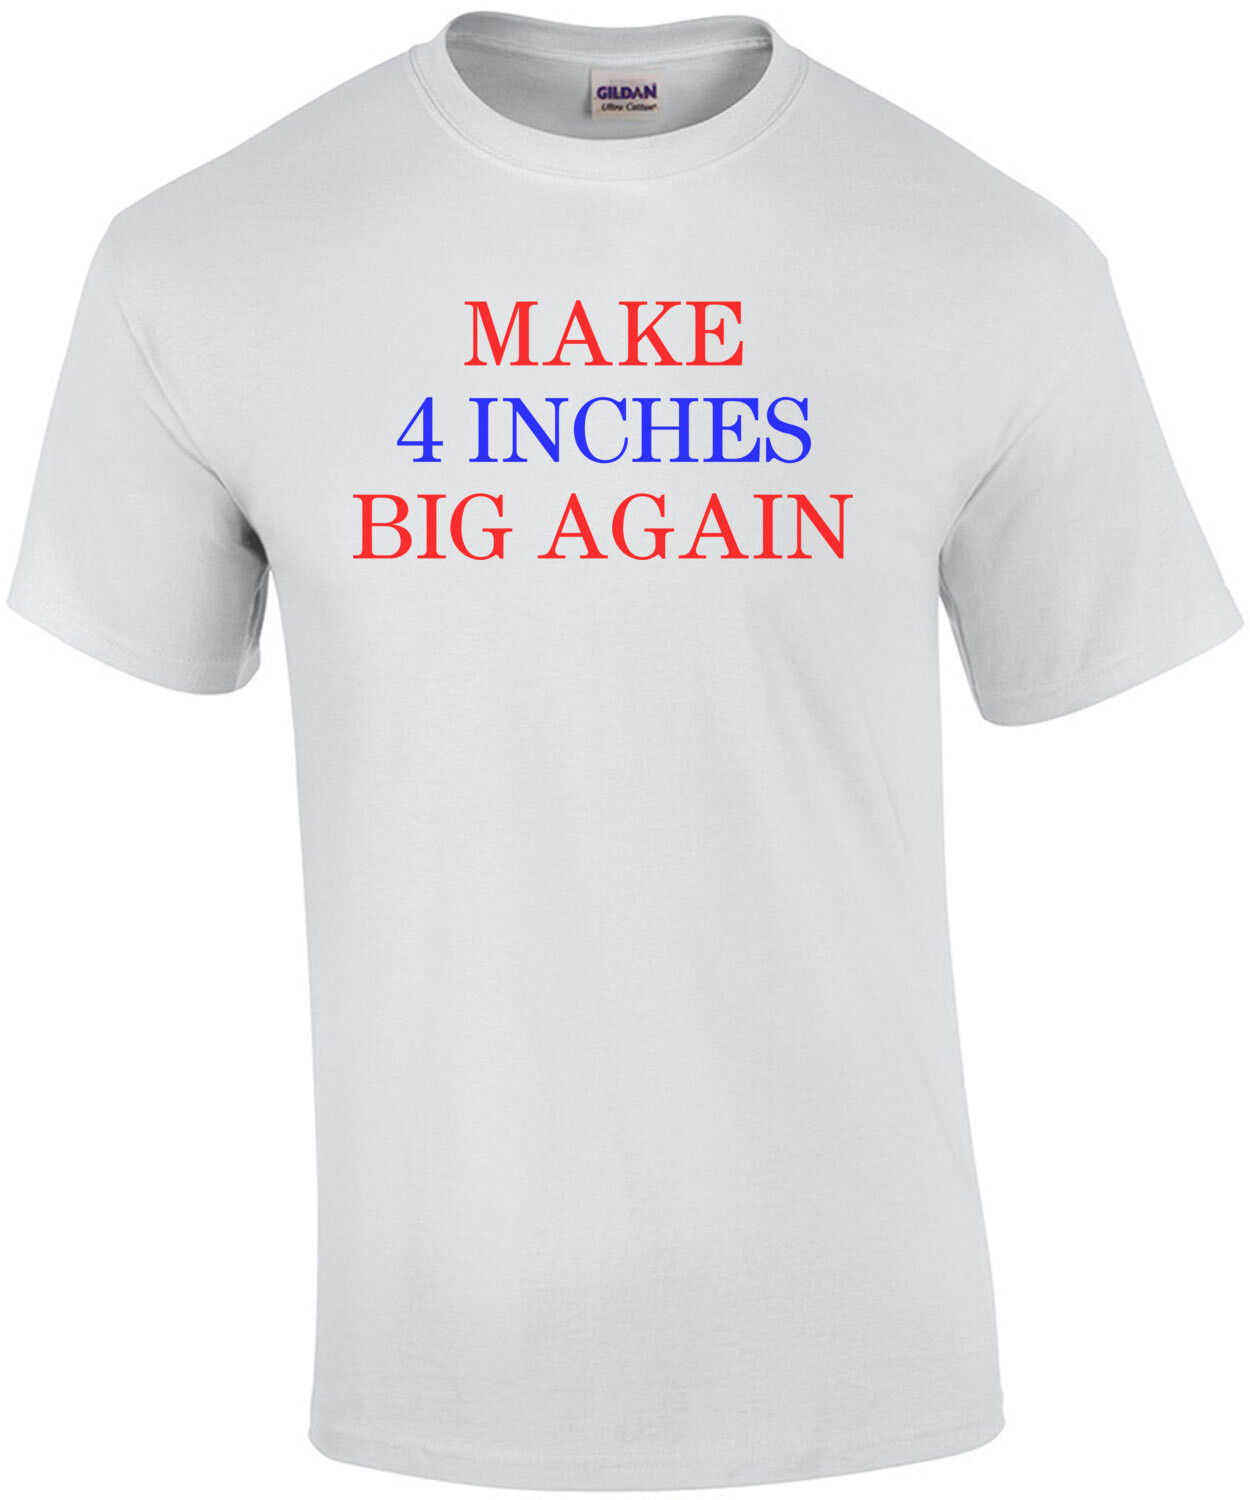 Make 4 Inches Big Again. Funny Offensive Shirt